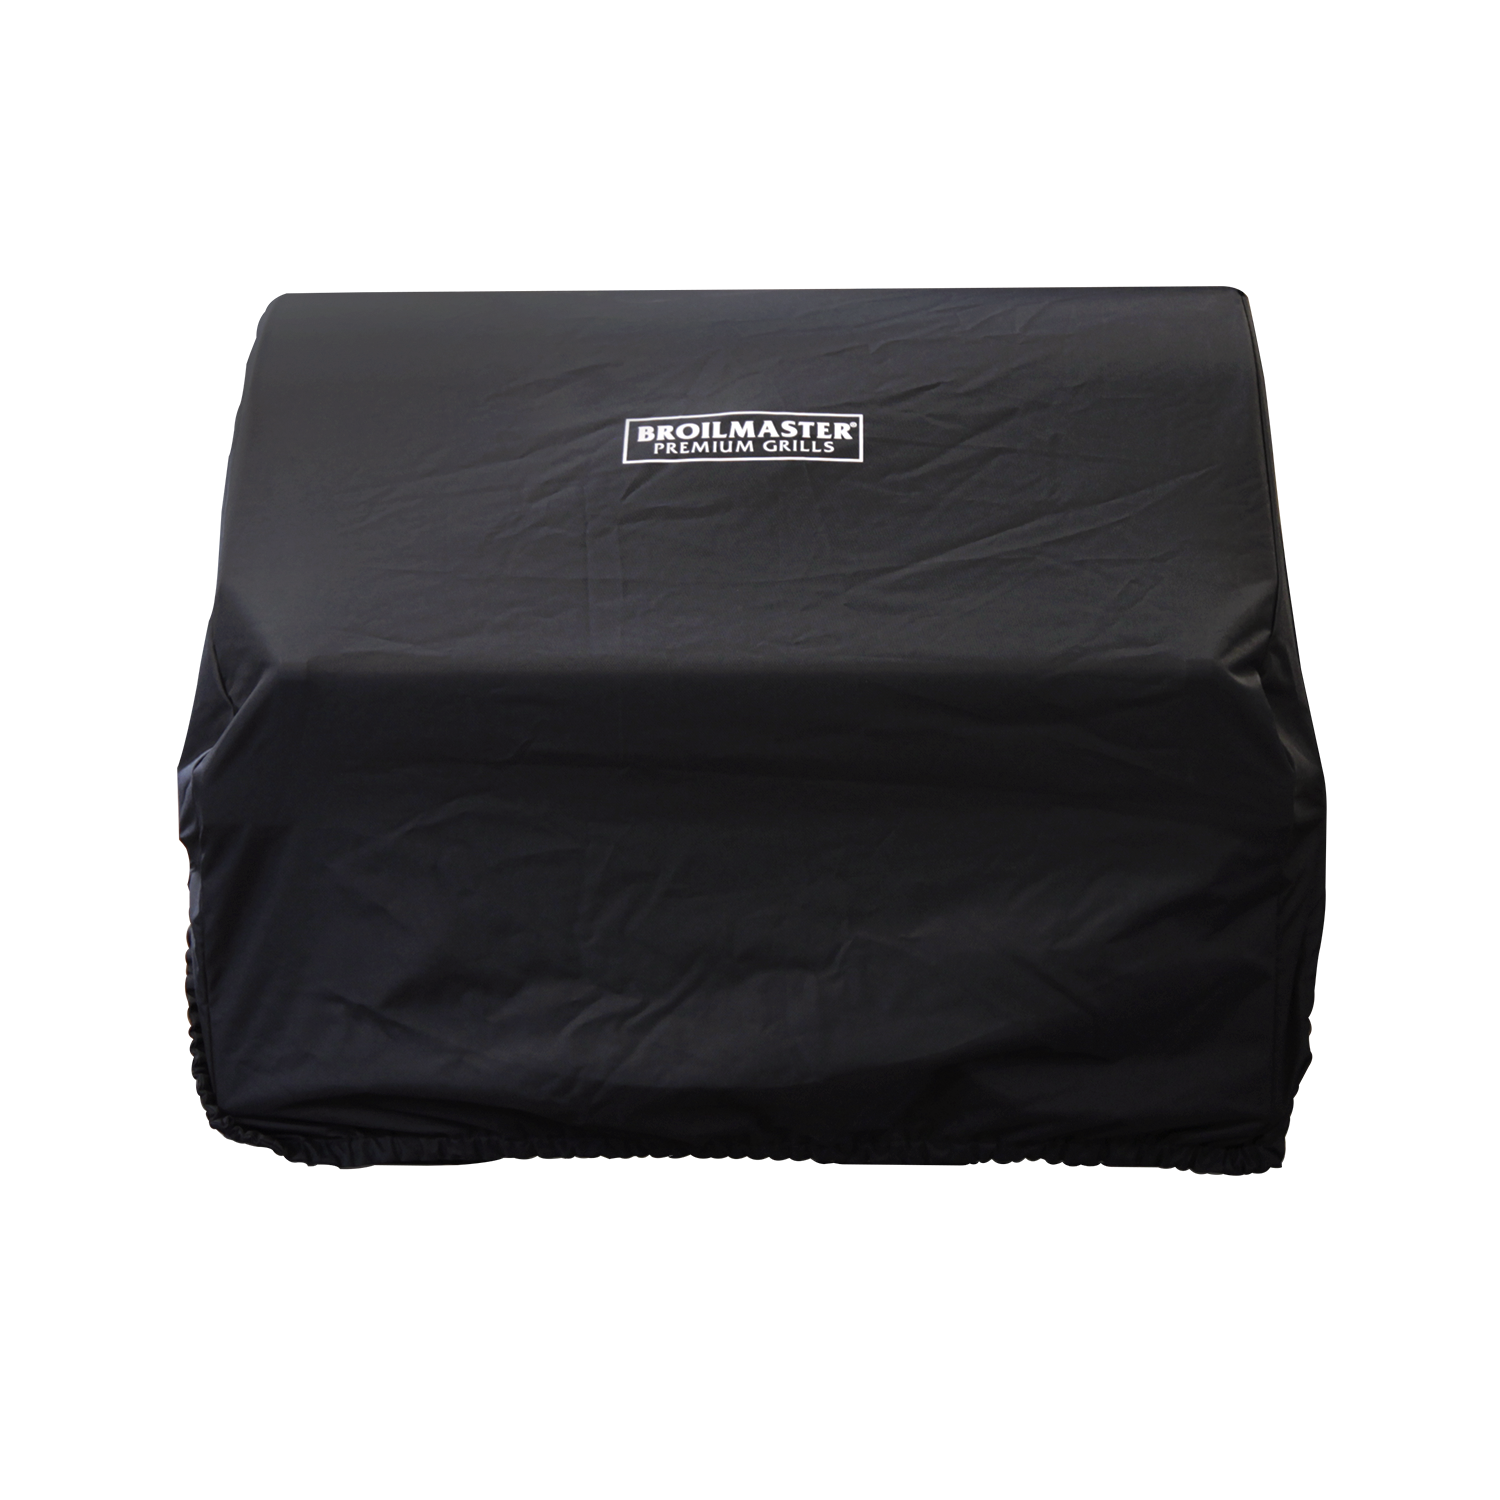 Broilmaster Cover For 34" Grill  Built In